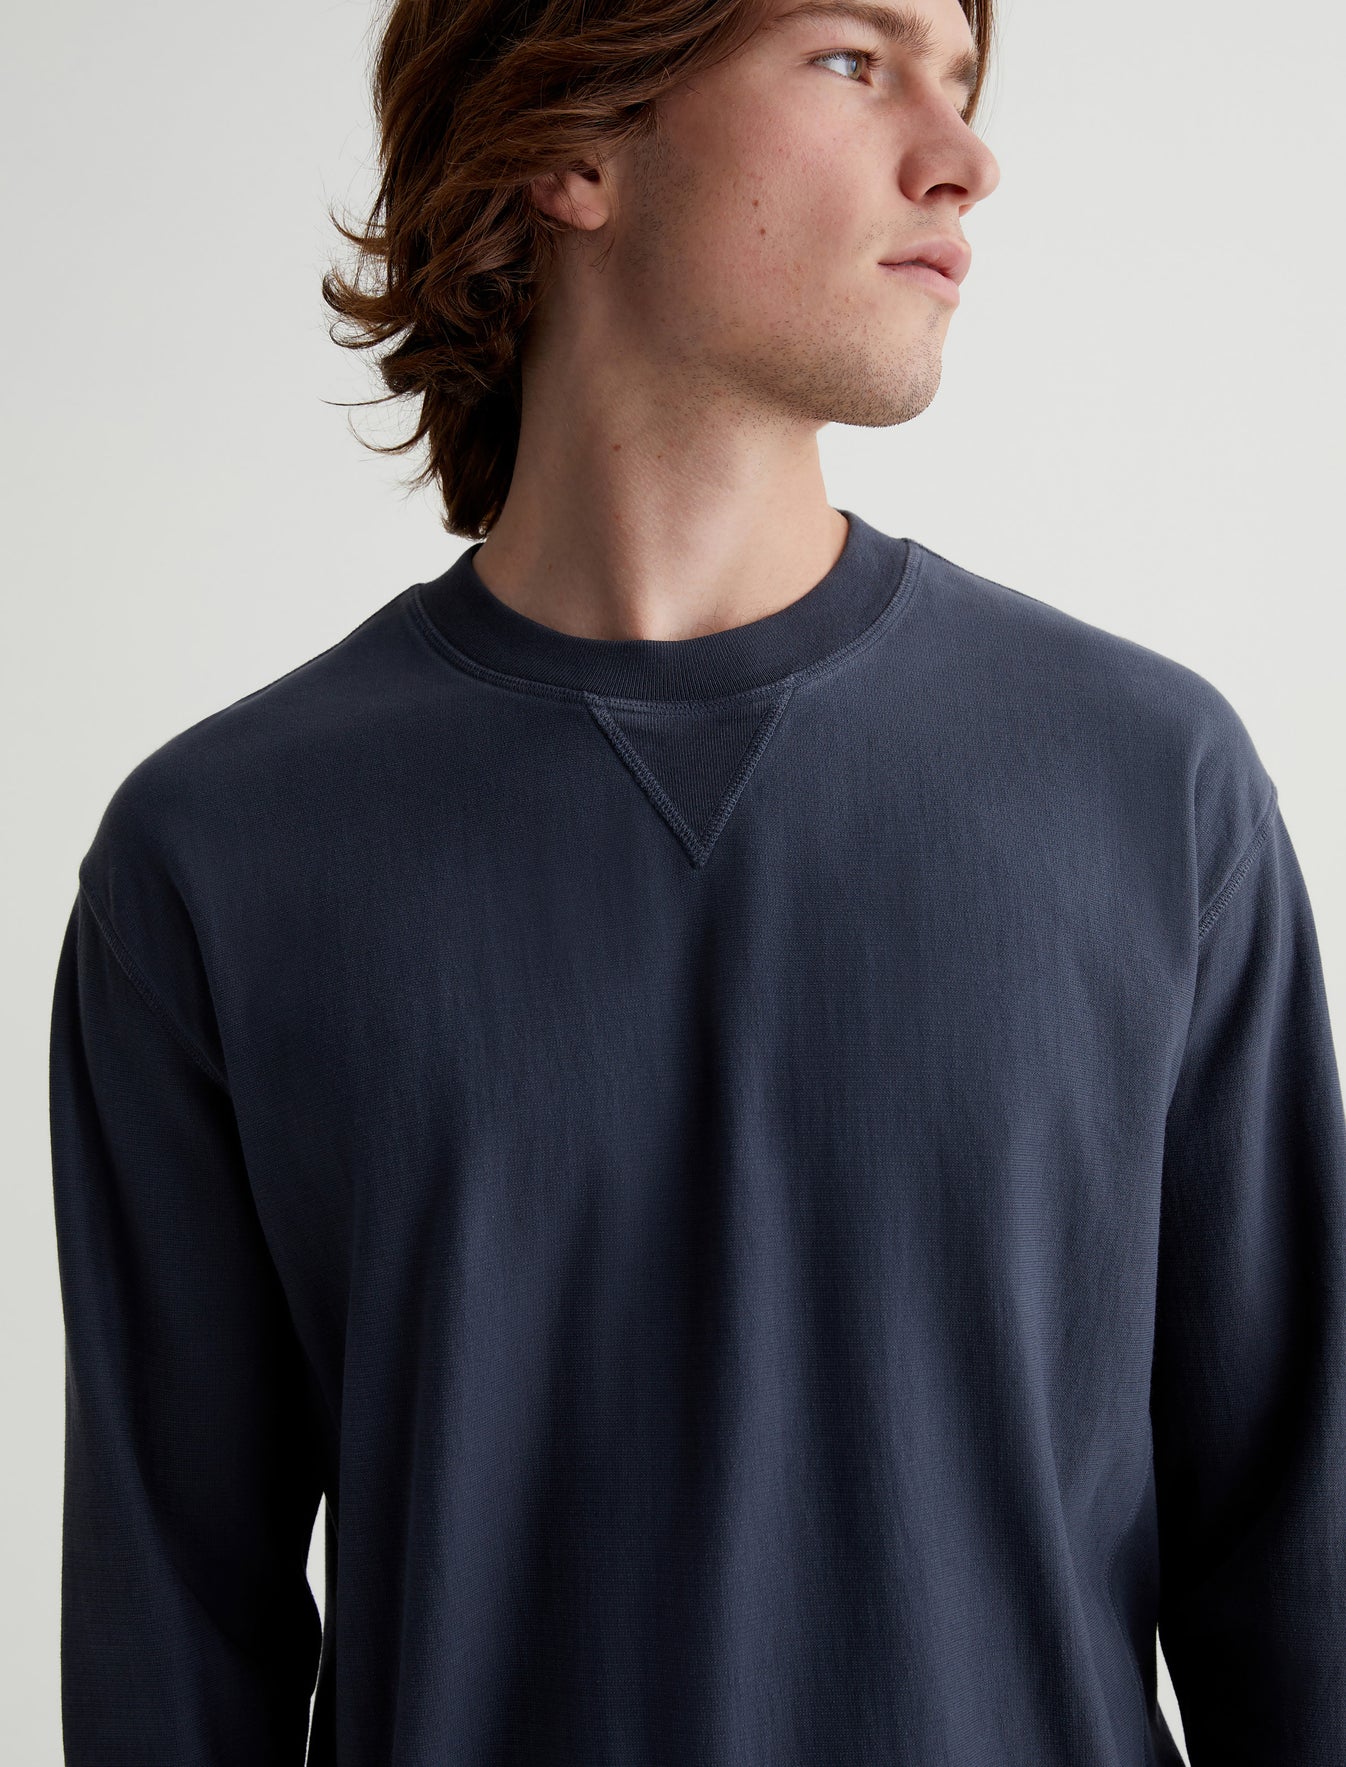 Arc Panelled Sweatshirt 5 Years Melange Smoke Relaxed Fit Crew Neck Panelled Mens Top Photo 3